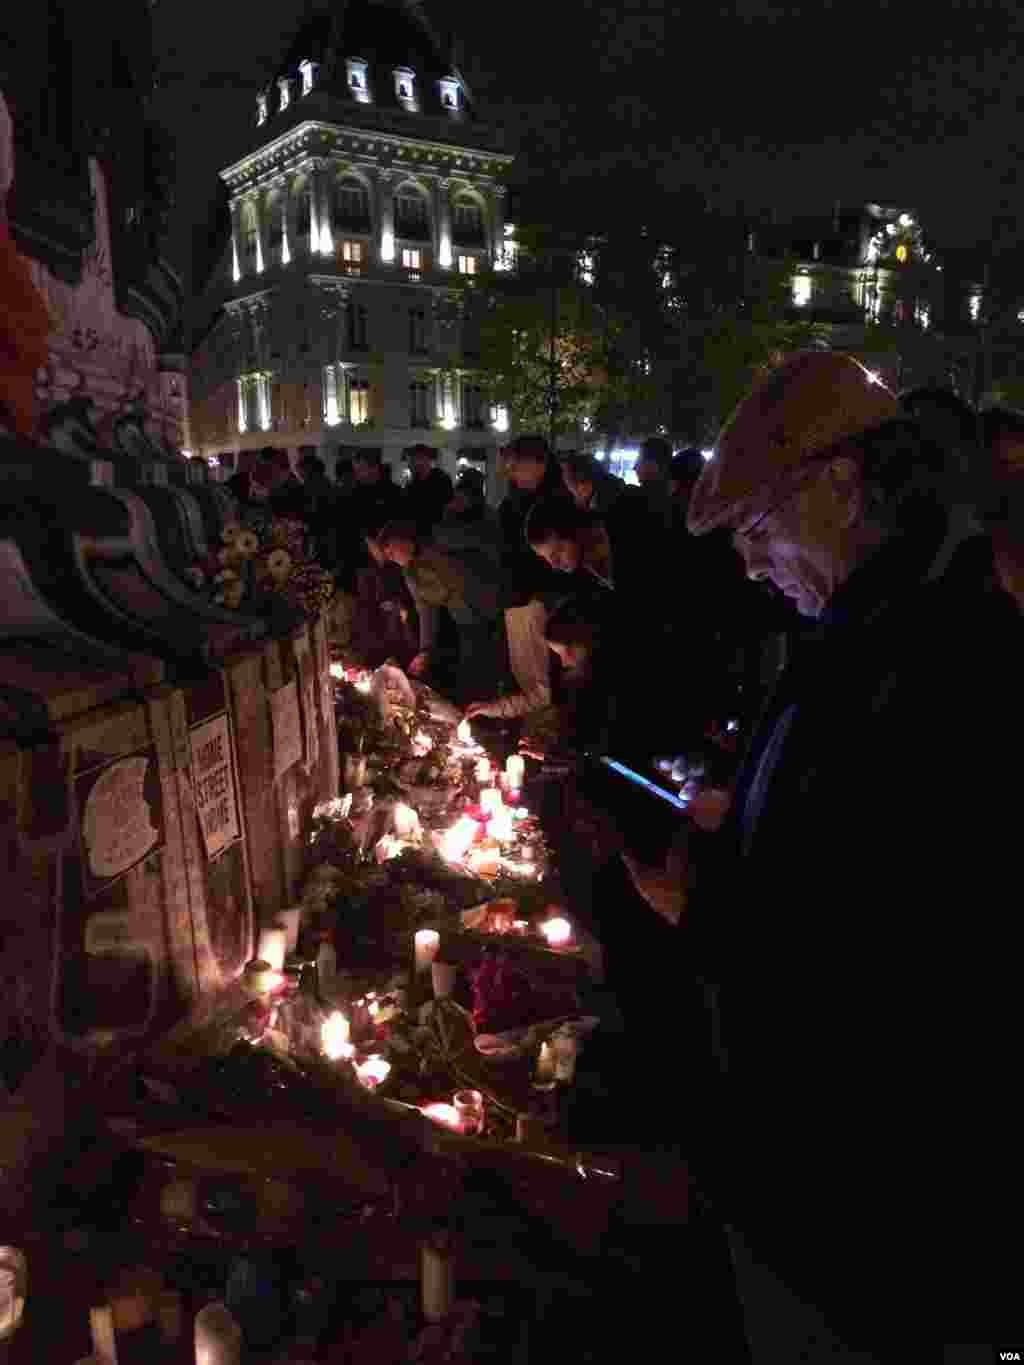 Mourners attend a candlelight vigil at Paris' Place de la Republique for the victims of Friday's terrorist attacks in the French capital, Nov. 14, 2015. (D. Schearf/VOA)